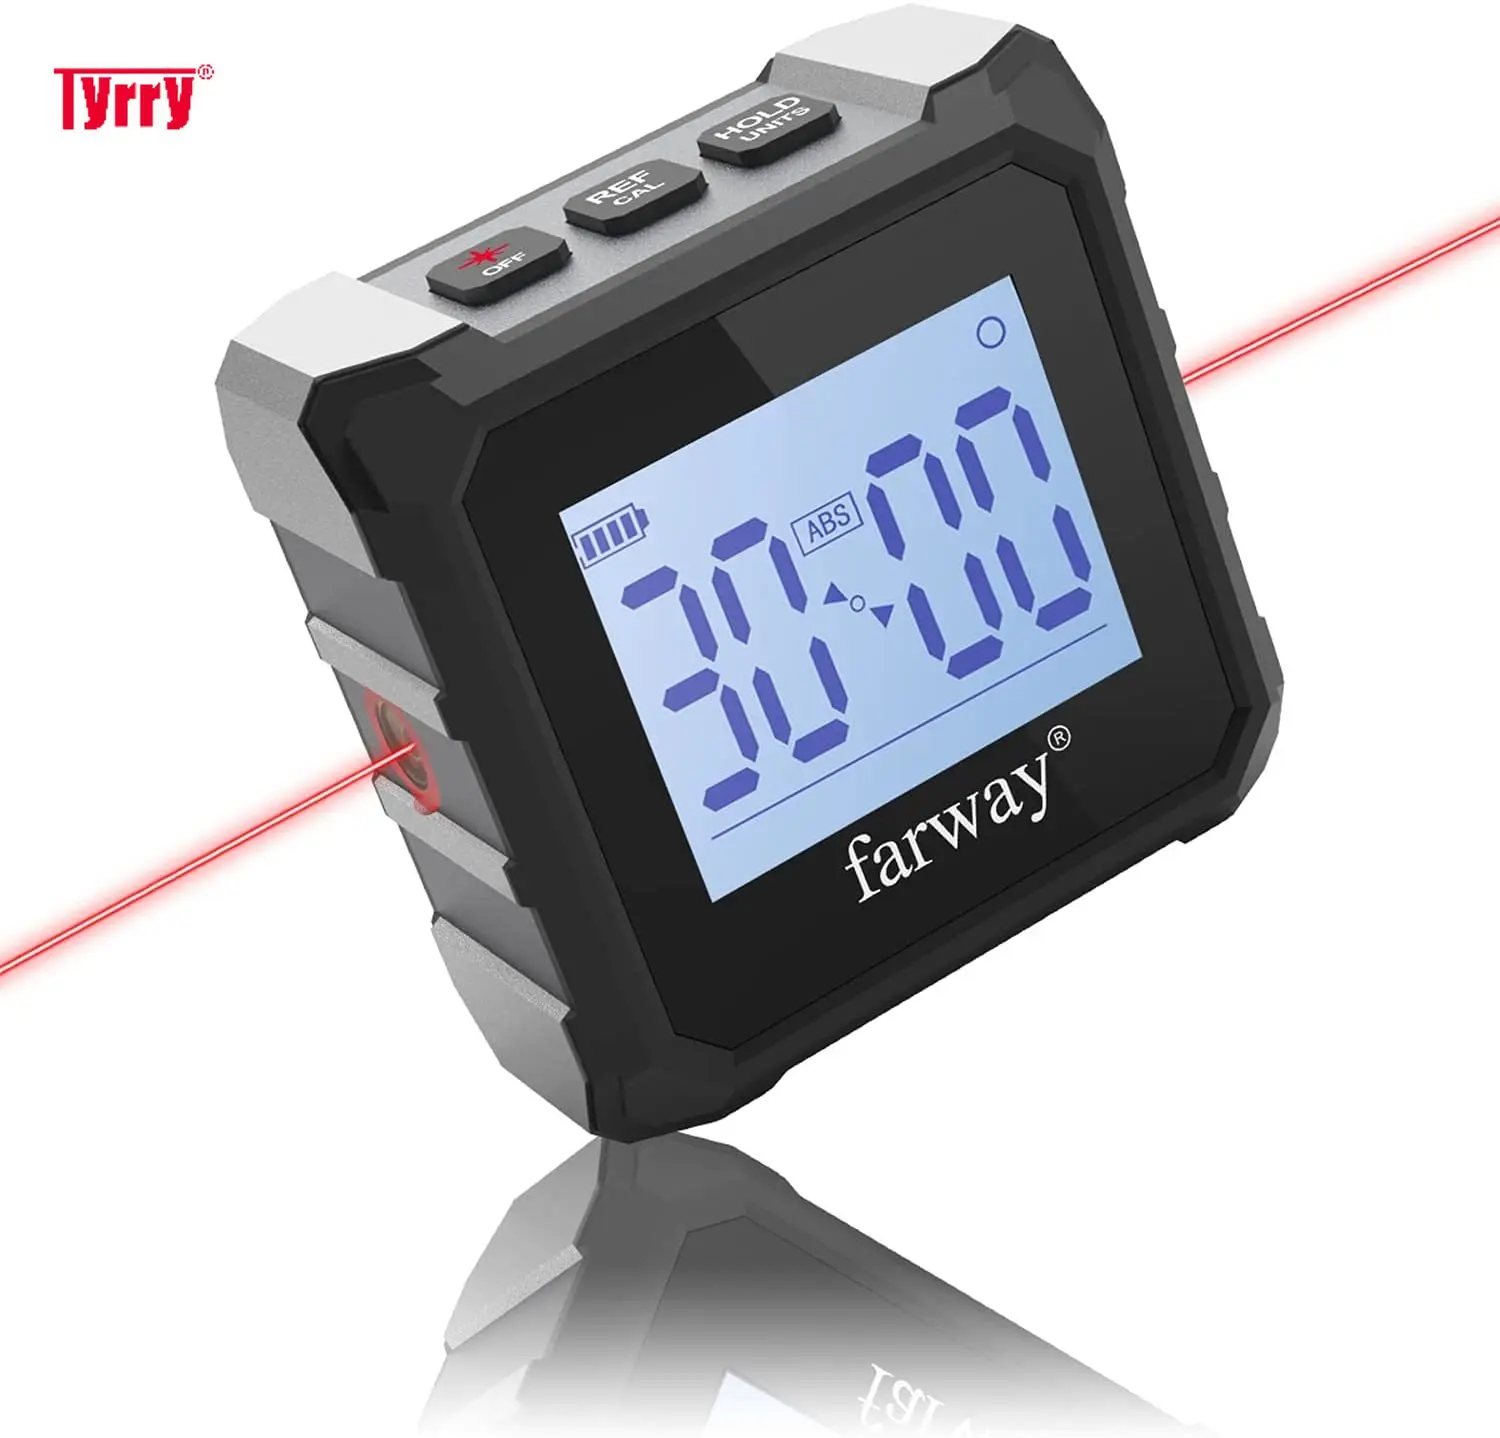 TYRRY Digital Angle Finder 2 in 1 Mini Laser Level and Angle Gauge  Level Box Precise Measurement Tool with LCD and Backlight